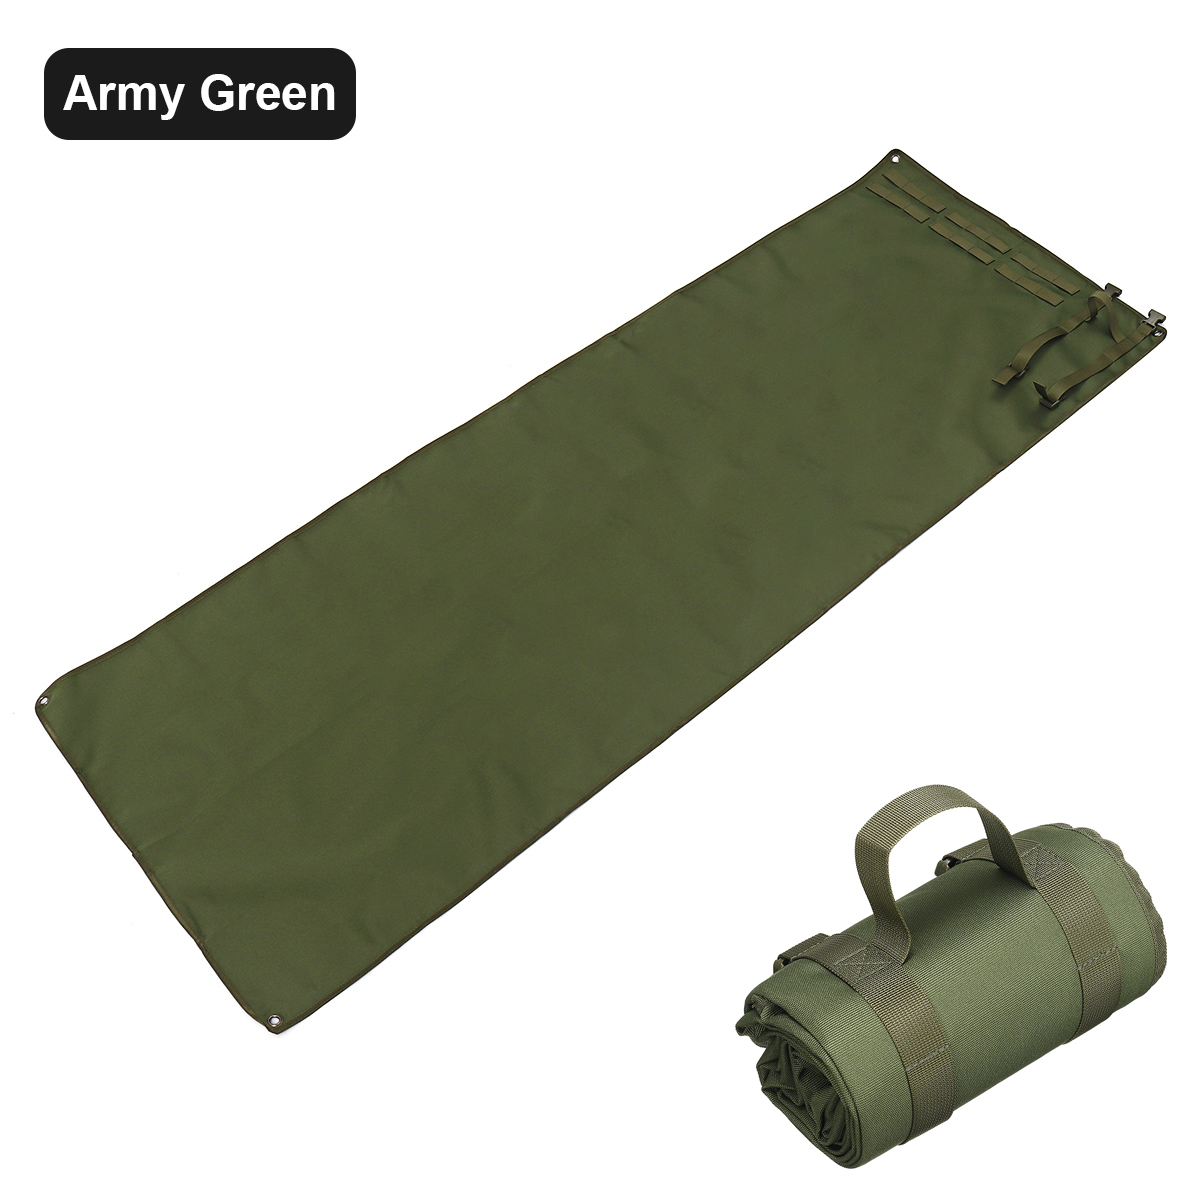 Picnic-Camping-Mat-Foldable-Roll-Up-Mat-Foldable-Portable-Non-Slip-Durable-Rest-Outdoor-Camping-Picn-1882342-11